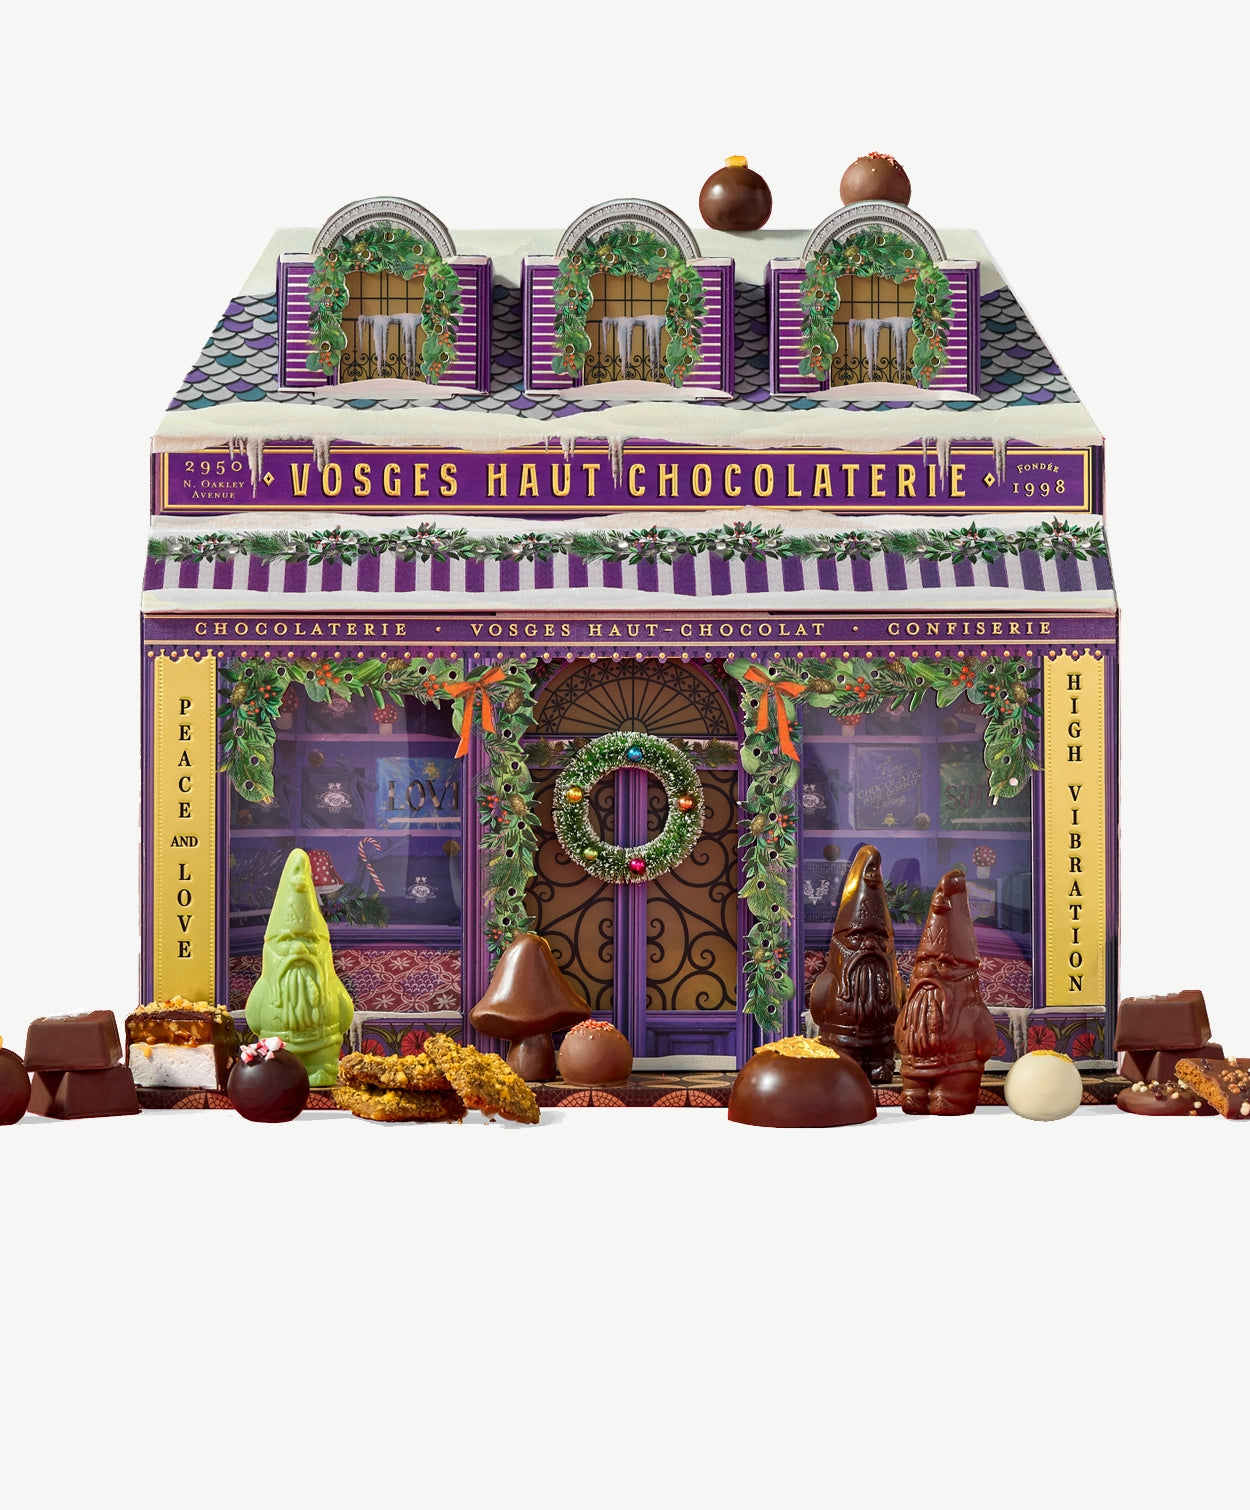 A Vosges Calendar of Advent resembling a small Chocolaterie, decorated in purple and gold foil sits surrounded by chocolate confections on a light grey background.